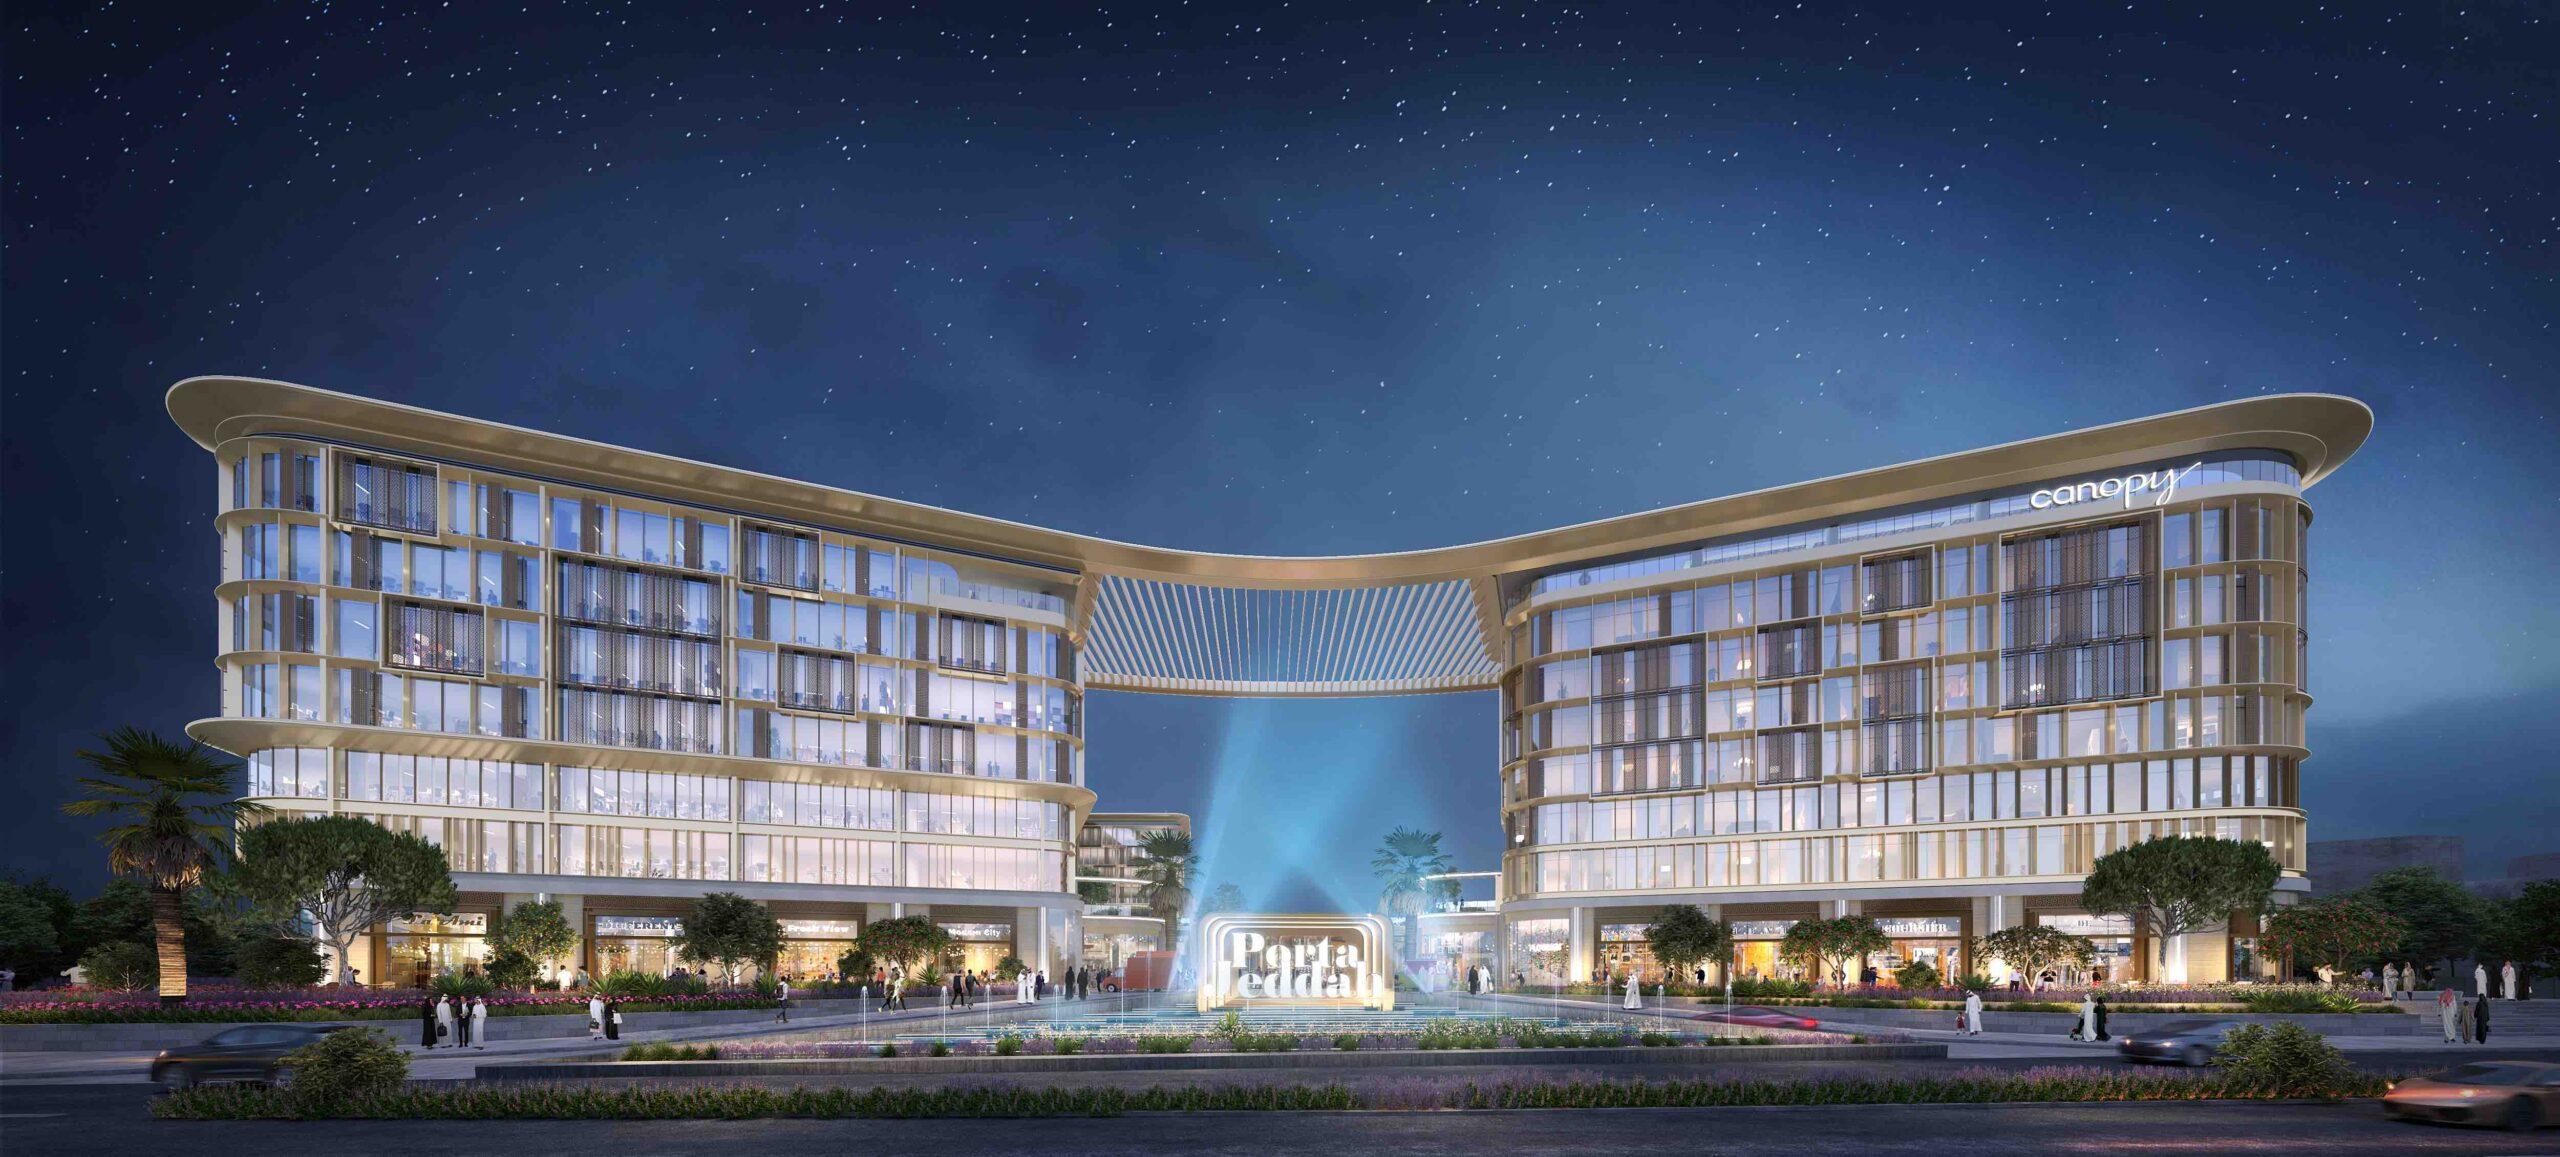 Hilton Hotels is expanding its empire in Saudi Arabia